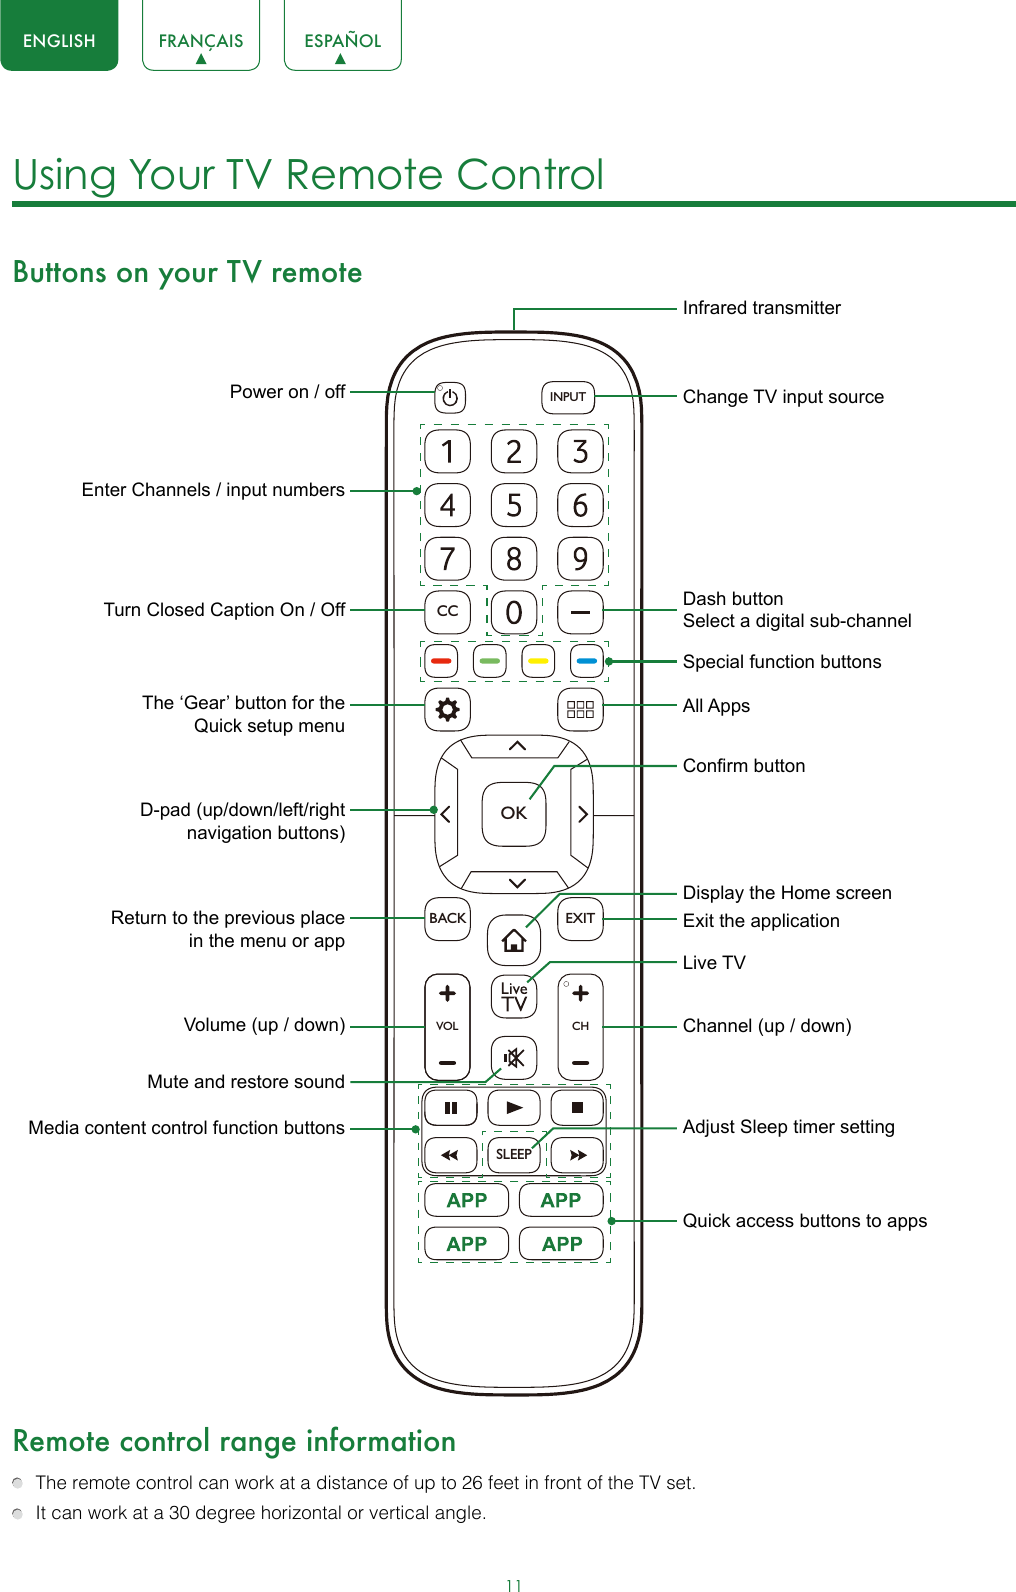 11ENGLISH FRANÇAIS ESPAÑOLUsing Your TV Remote Control Buttons on your TV remoteRemote control range information  The remote control can work at a distance of up to 26 feet in front of the TV set.  It can work at a 30 degree horizontal or vertical angle.SLEEPVOLCHOKCCBACK EXITINPUTPower on / offEnter Channels / input numbersMedia content control function buttonsDash button Select a digital sub-channelD-pad (up/down/left/right navigation buttons)Volume (up / down)Mute and restore soundAdjust Sleep timer settingThe ‘Gear’ button for the Quick setup menuReturn to the previous place in the menu or appLive TVInfrared transmitterChange TV input sourceChannel (up / down)Exit the applicationTurn Closed Caption On / OffSpecial function buttonsAll AppsDisplay the Home screenConrm buttonQuick access buttons to apps